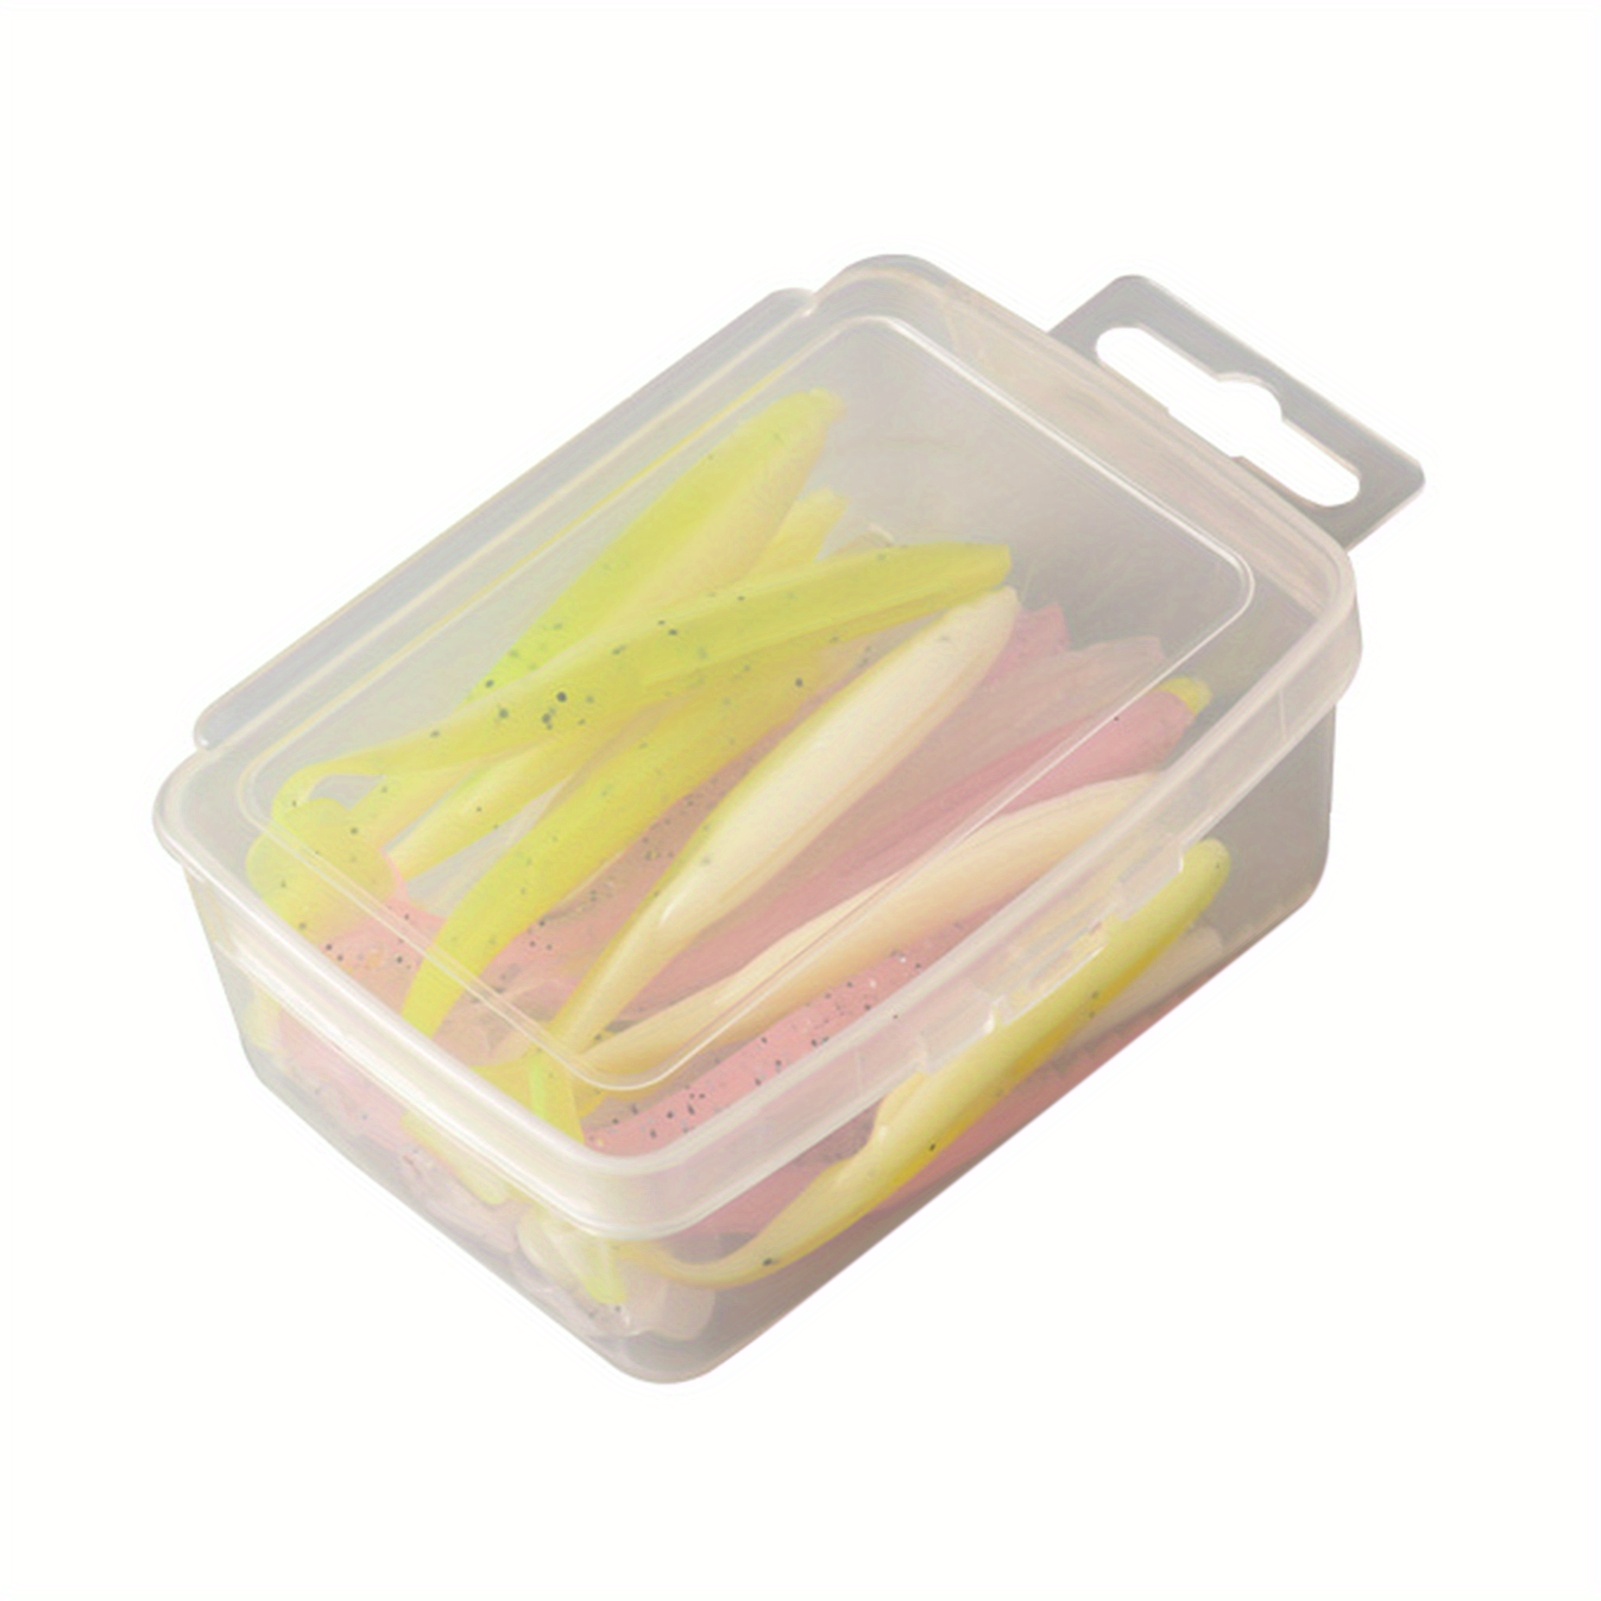 4pcs Plastic Fishing Lure Box, Sturdy Reusable Fishing Gear Storage Box,  Transparent ABS Plastic Storage Box, For Outdoor Fishing (1.18*2.2*2.99  Inch)